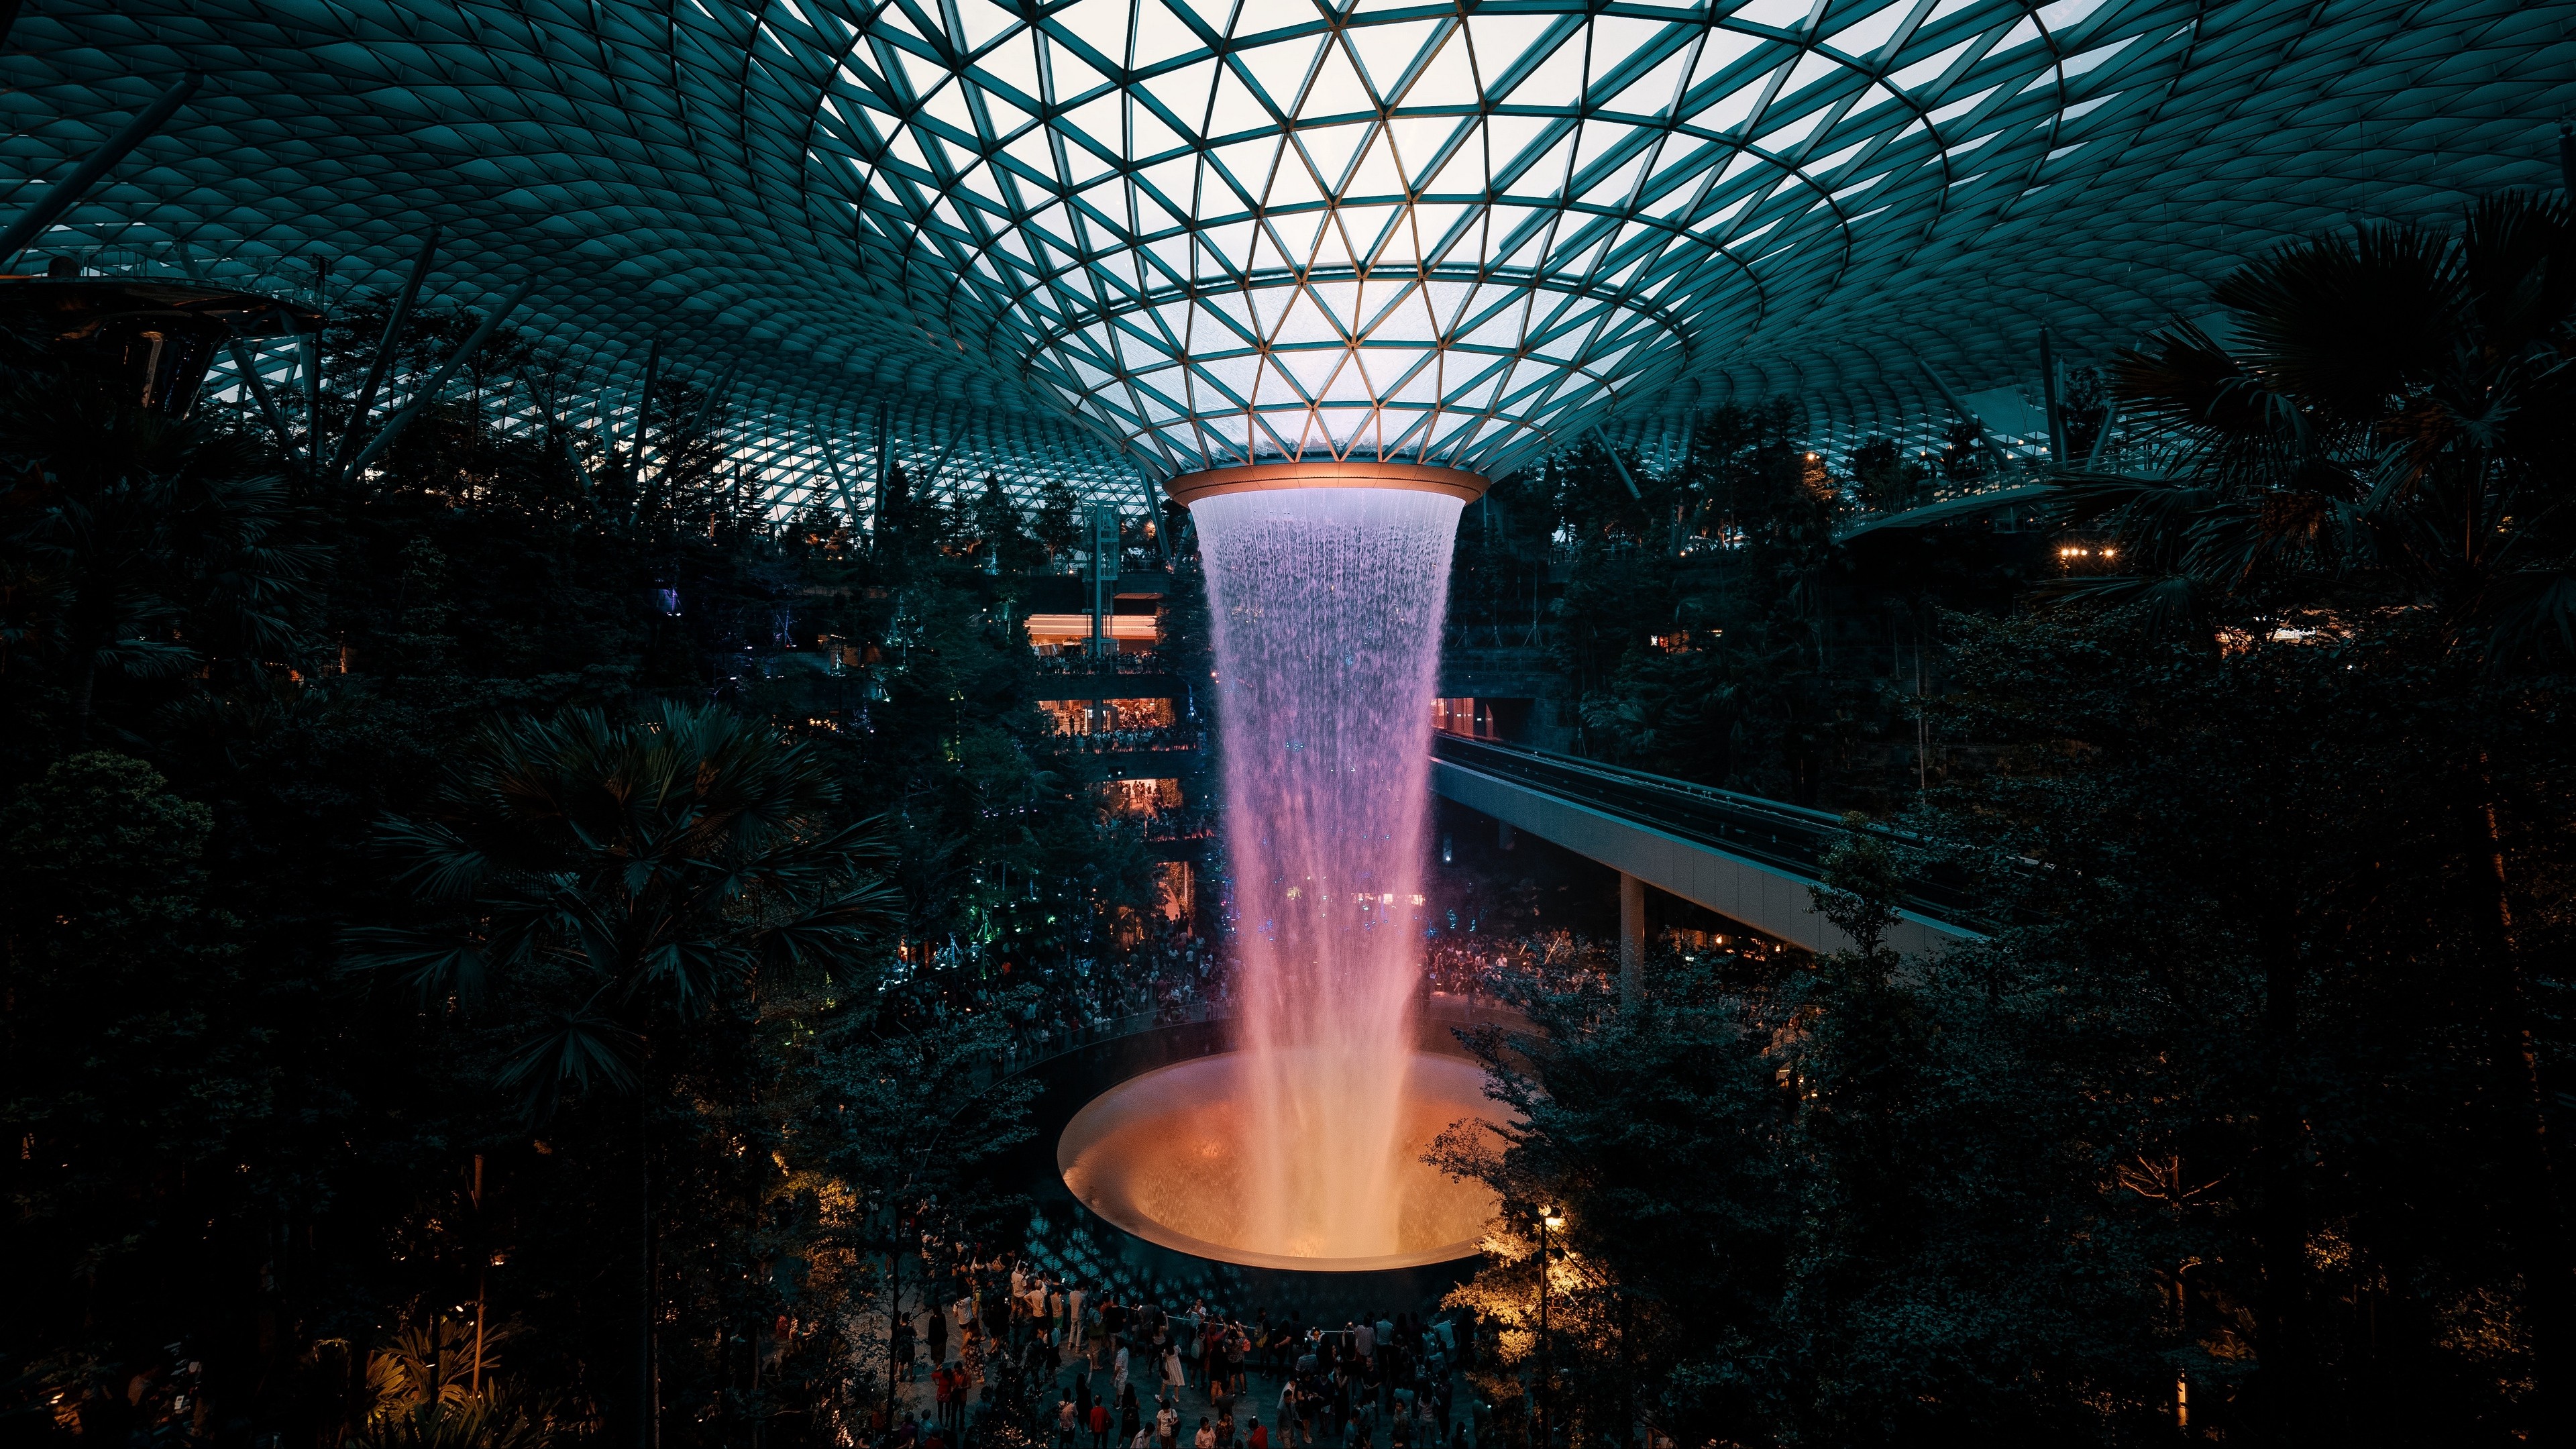 General 3840x2160 plants photography architecture water Signapore Jewel Changi Airport Singapore